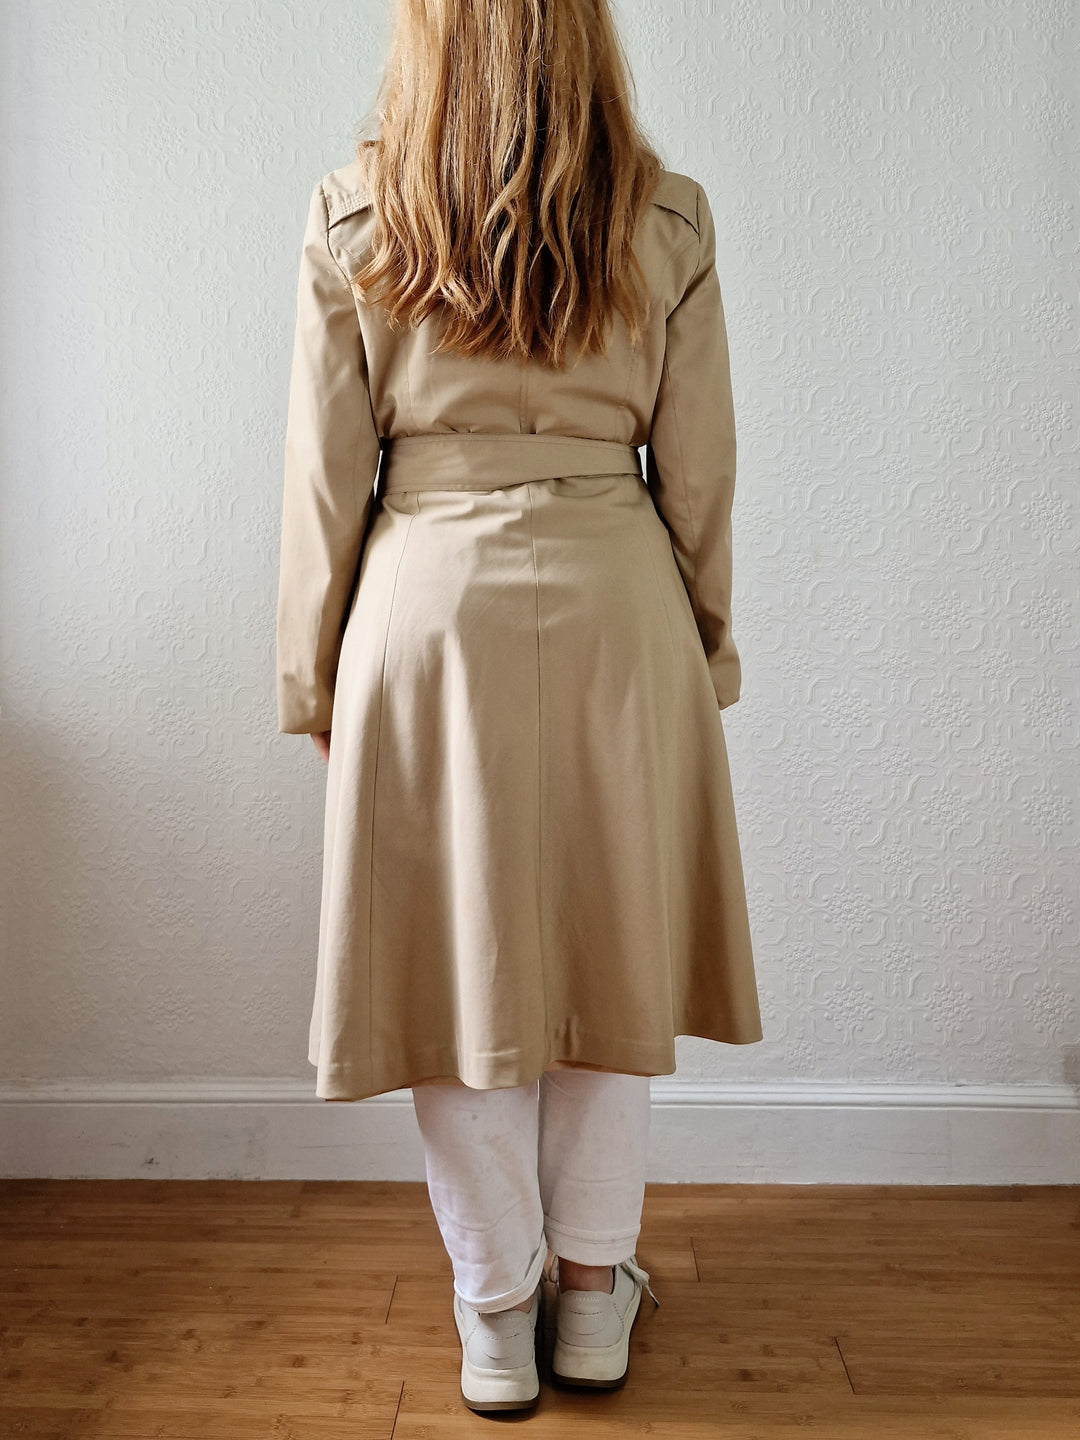 Vintage 70s Camel Double Breasted A-Line Trench Coat - S